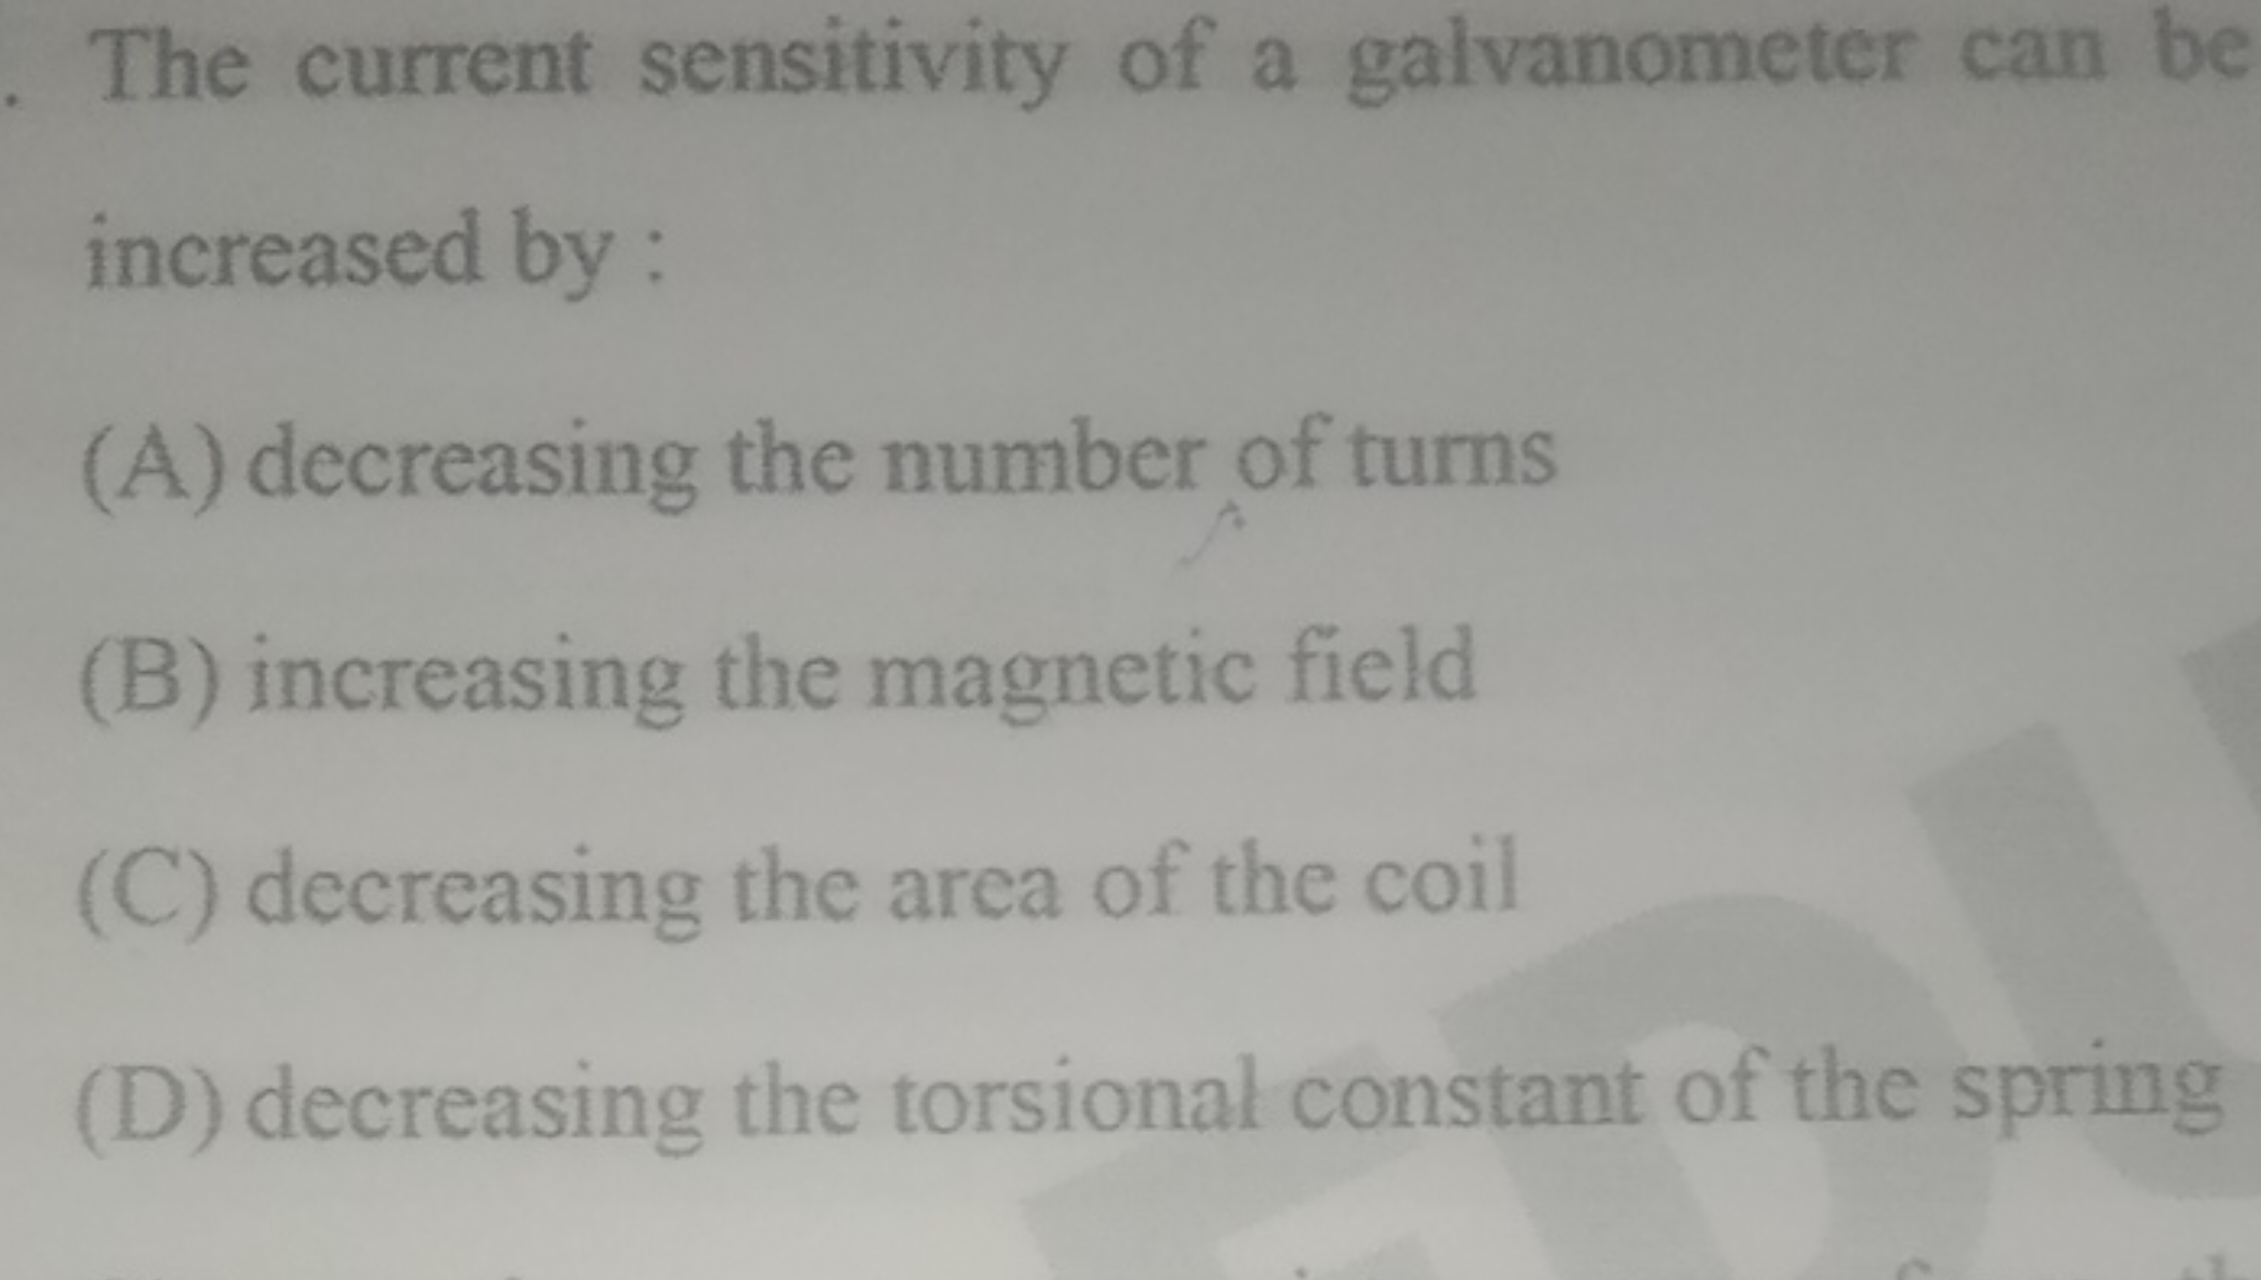 The current sensitivity of a galvanometer can be increased by :